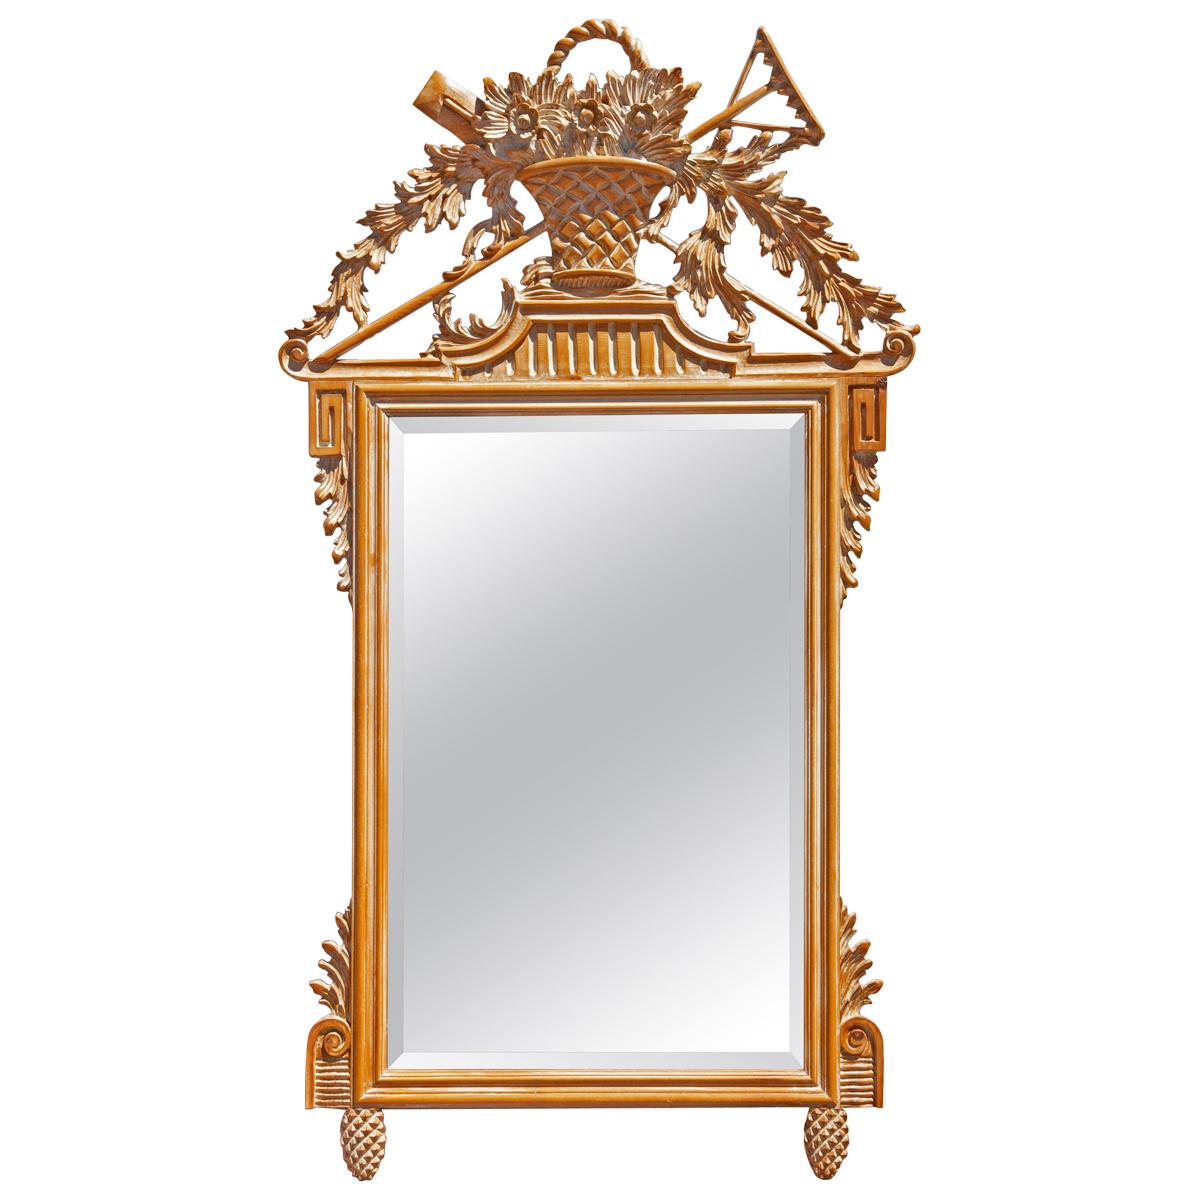 Louis XV French Provincial Style Mirror by LaBarge